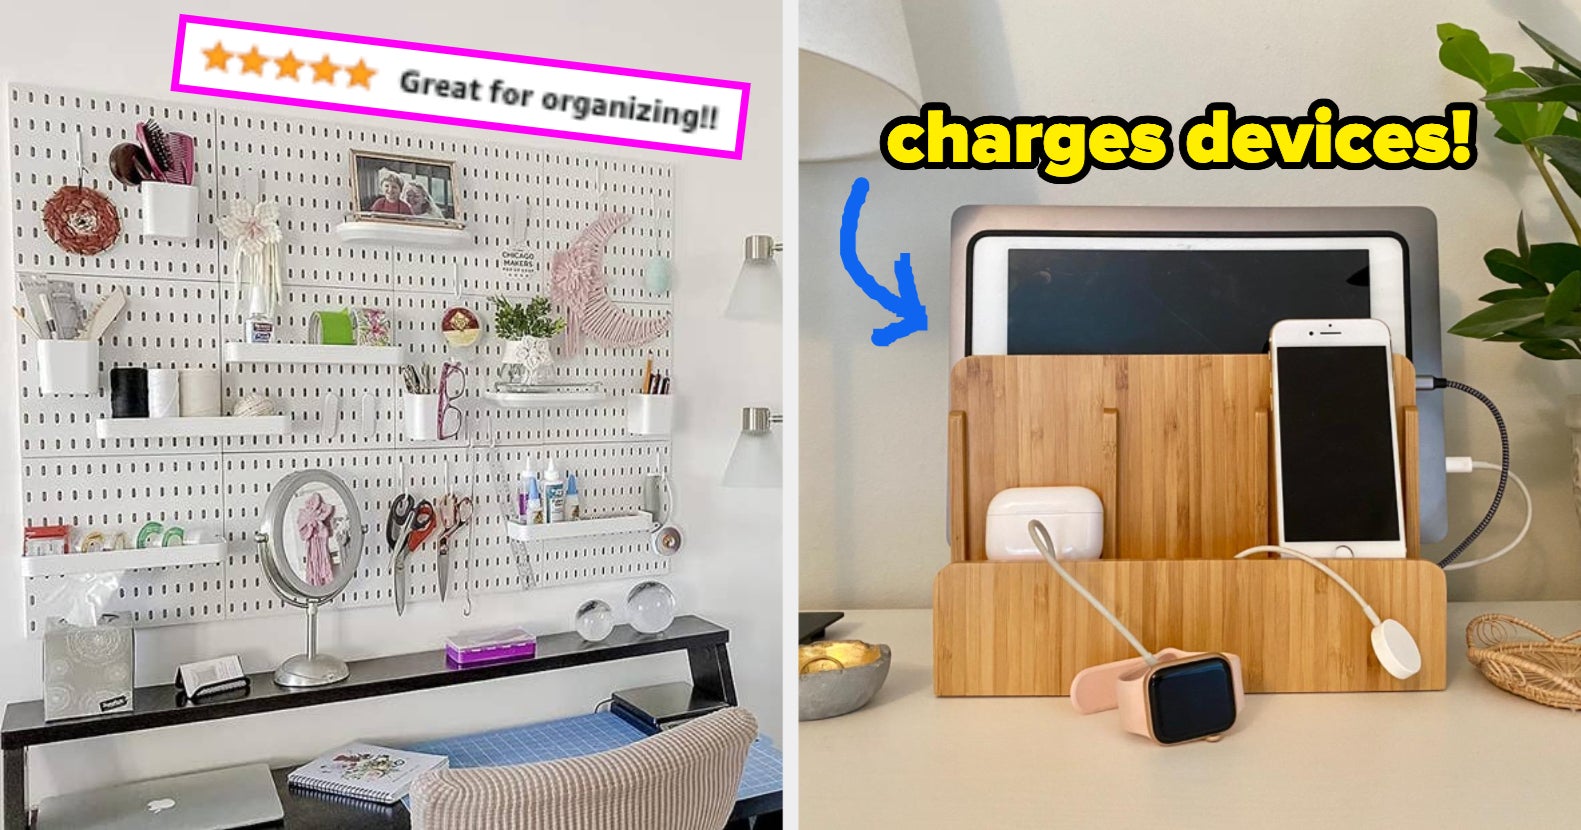 39 Desk Organization Products For A Clutter-Free Office